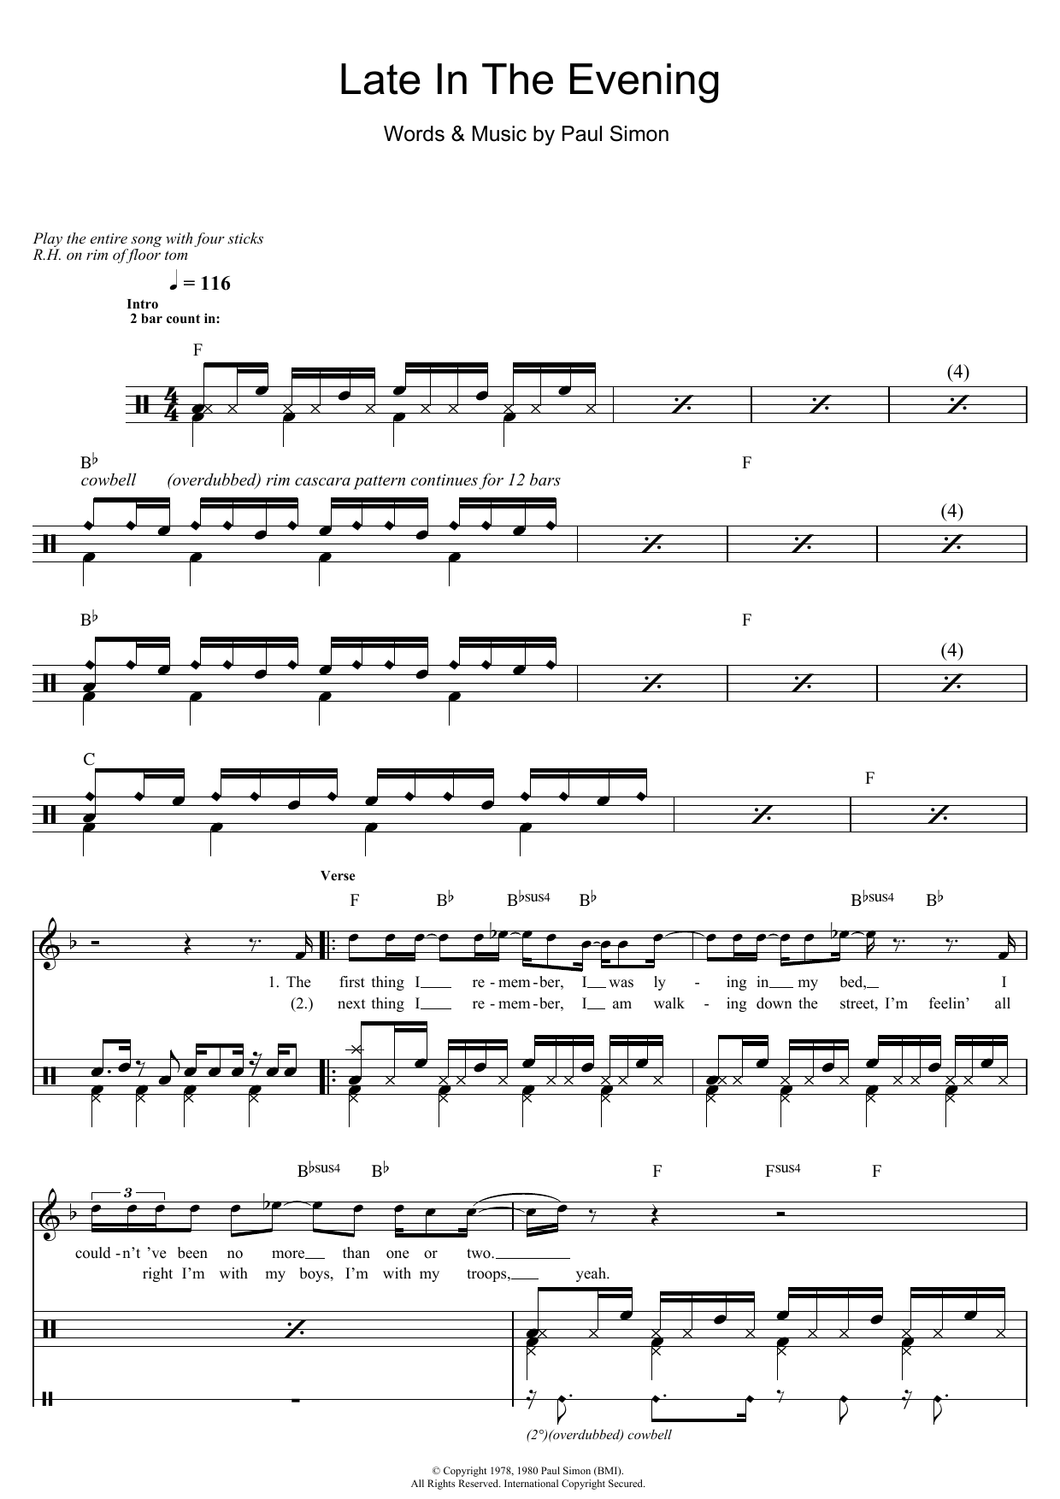 Late in the Evening - Paul Simon - Full Drum Transcription / Drum Sheet Music - SheetMusicDirect D